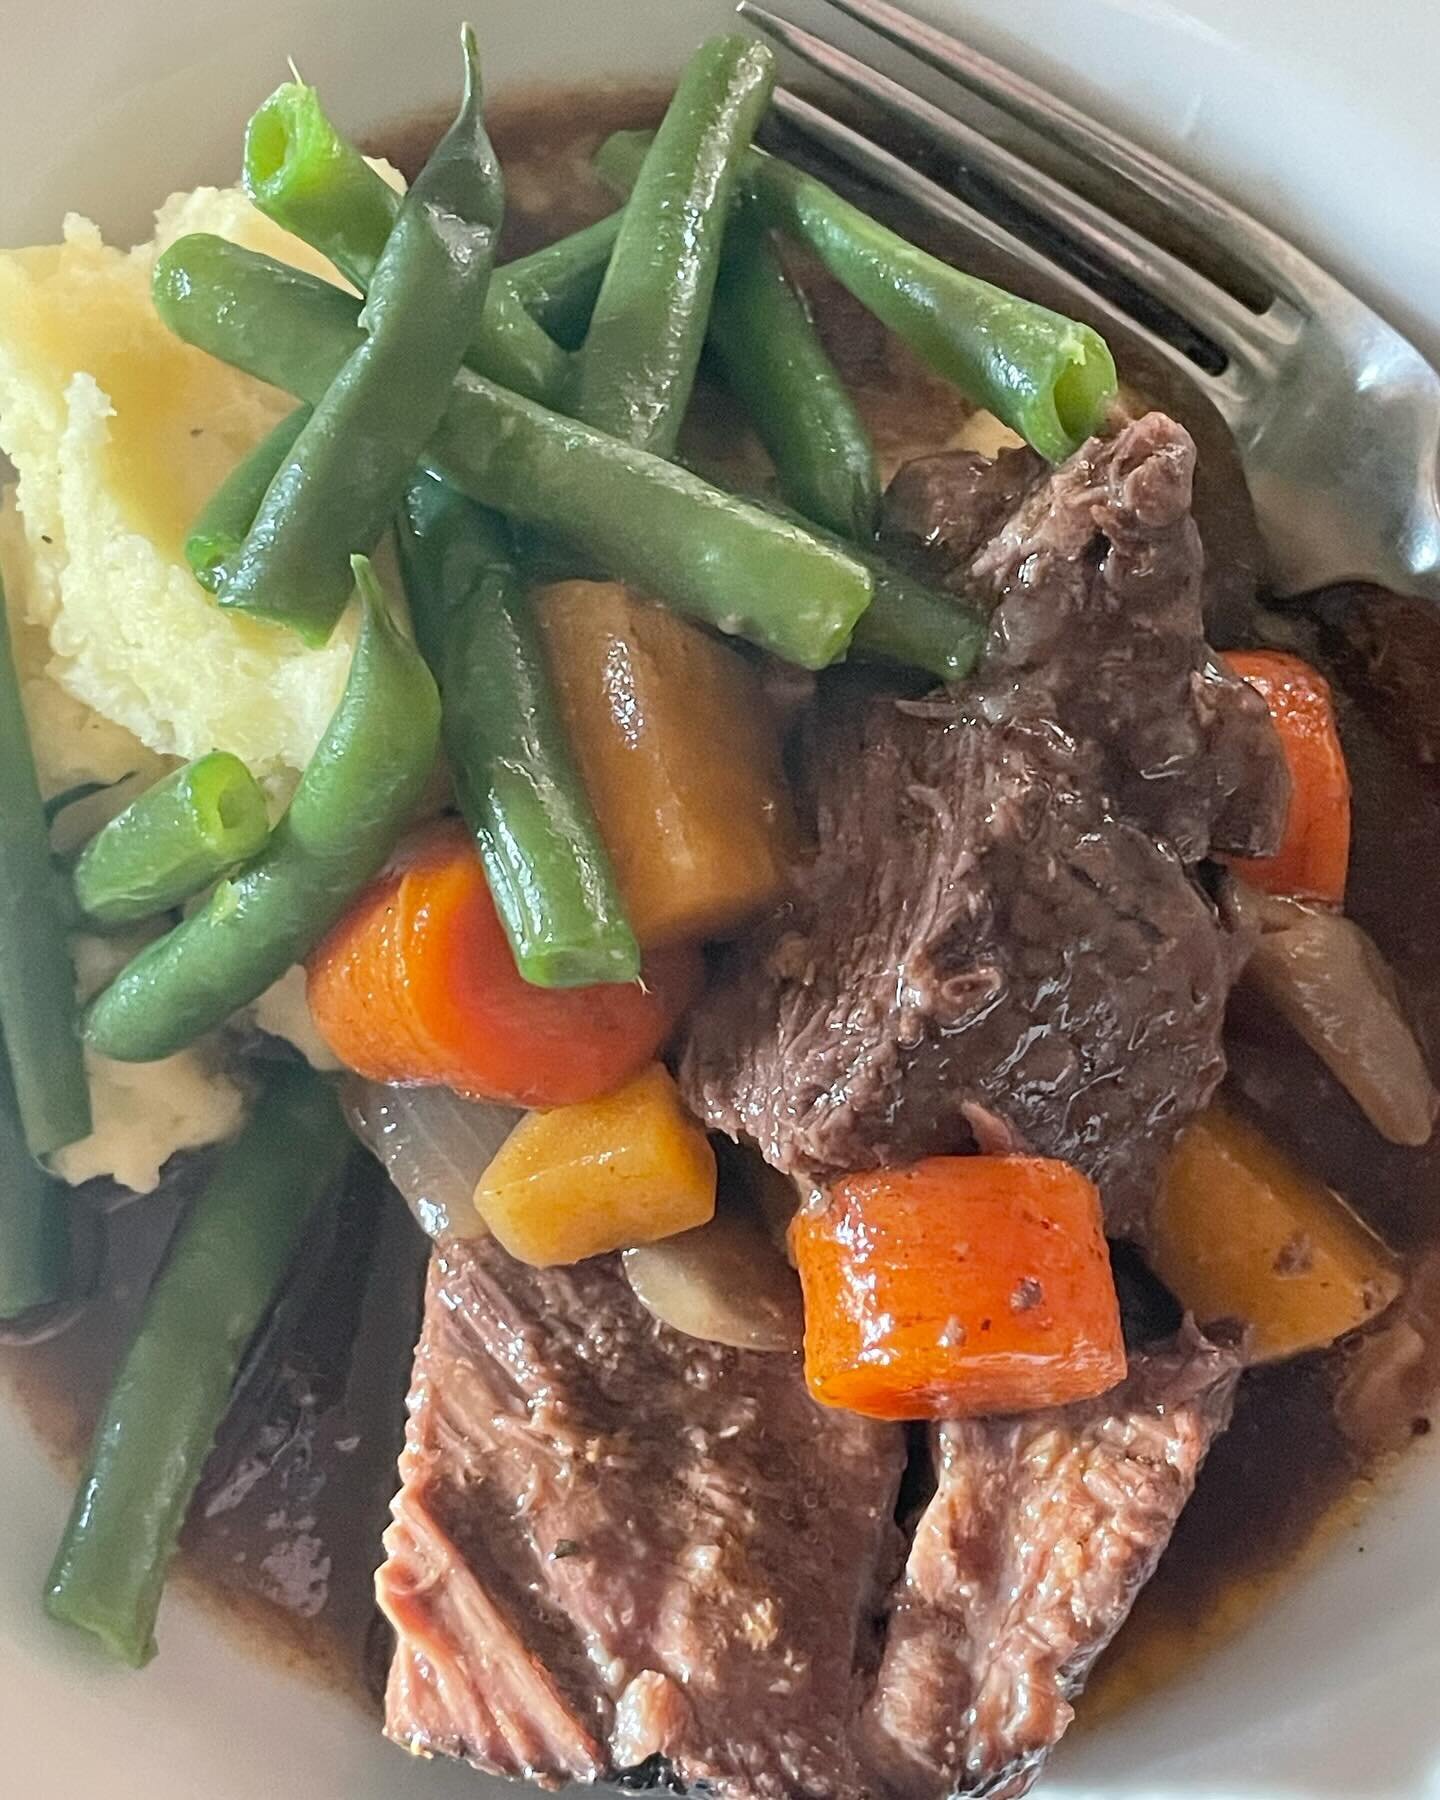 Very slow cooked beef stew w good wine and Demi glace, turnips, carrots and green beans&hellip; amazing dish!! @grassyflatranch meats are delicious&hellip; and knowing the people and location where the meat came from is a great bonus!!
.
.
.
.
.
.
.
